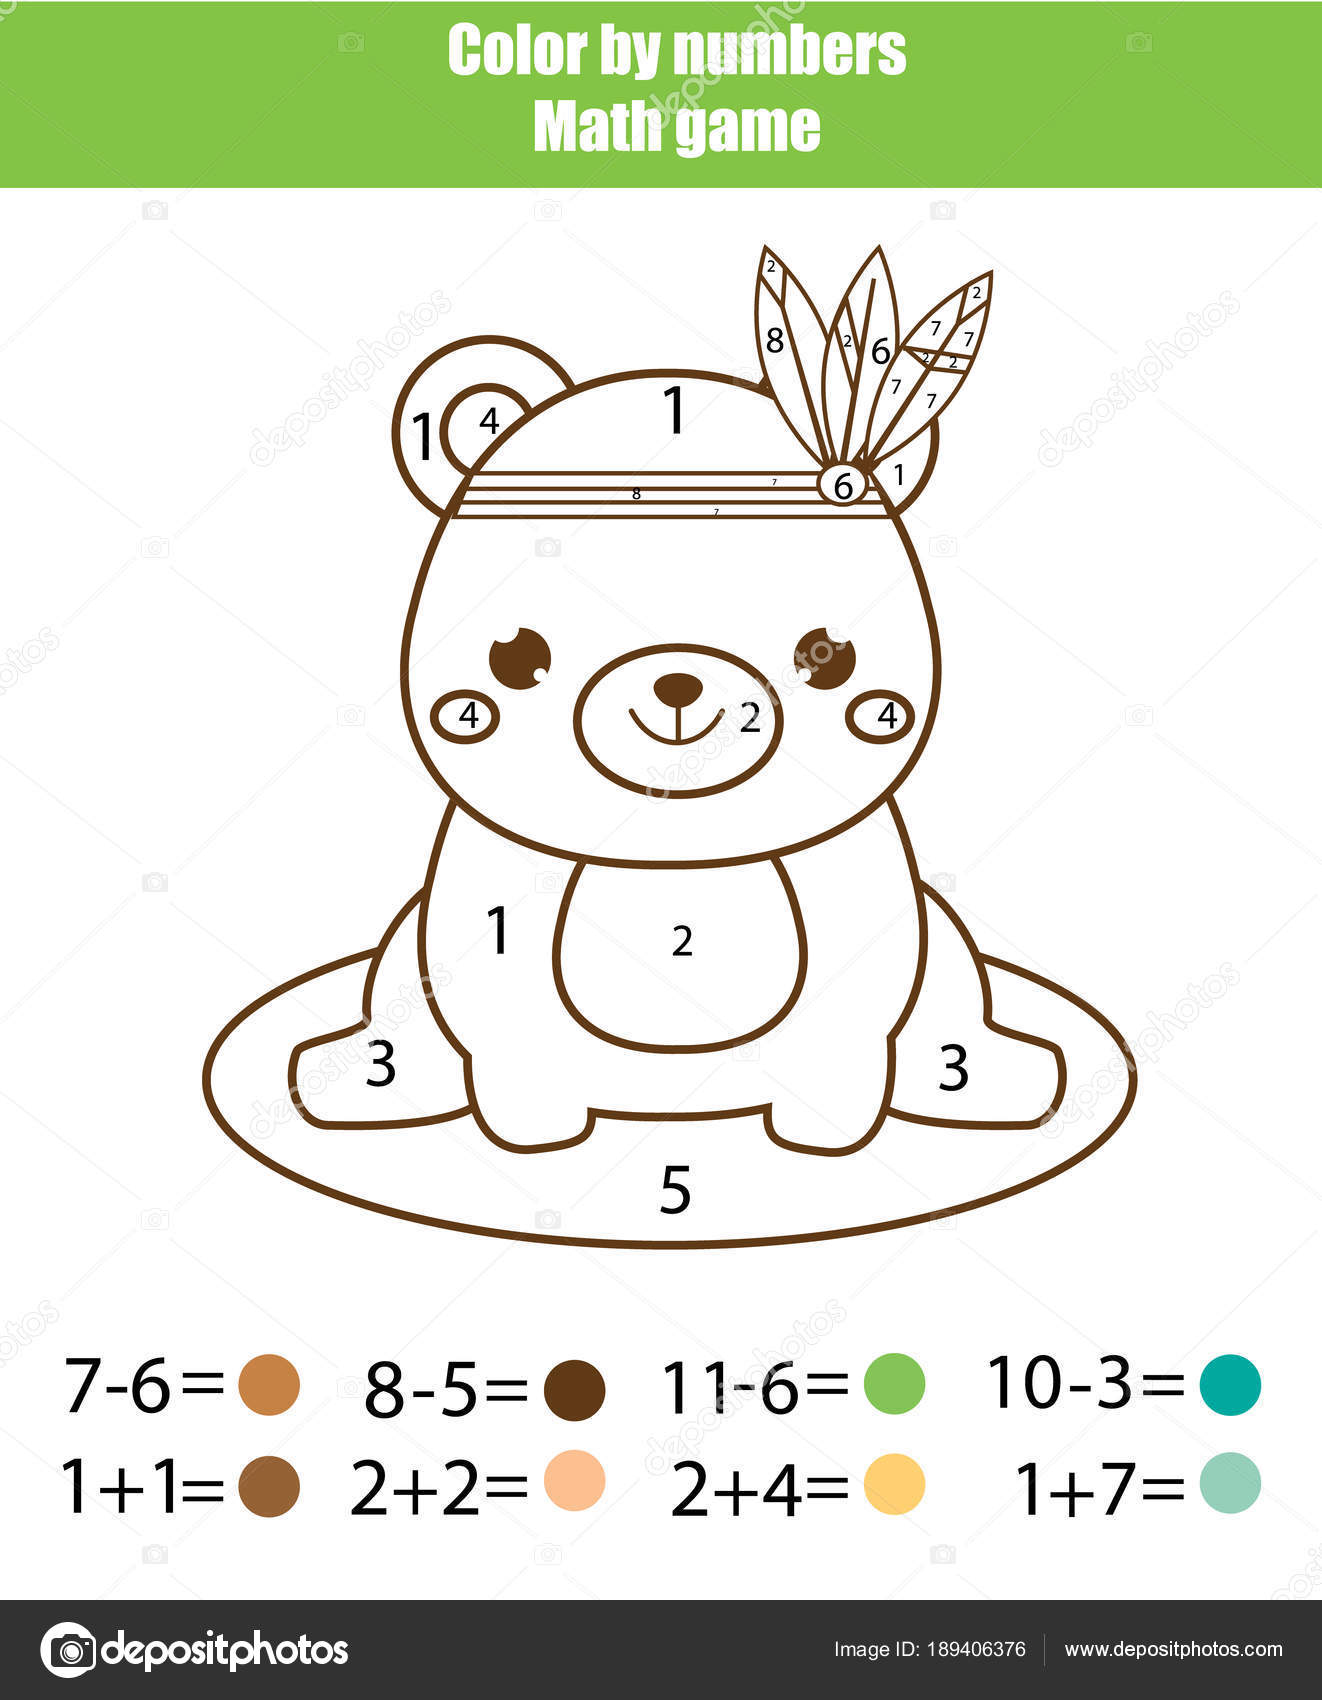 Color by numbers game for kids coloring page Vector Image